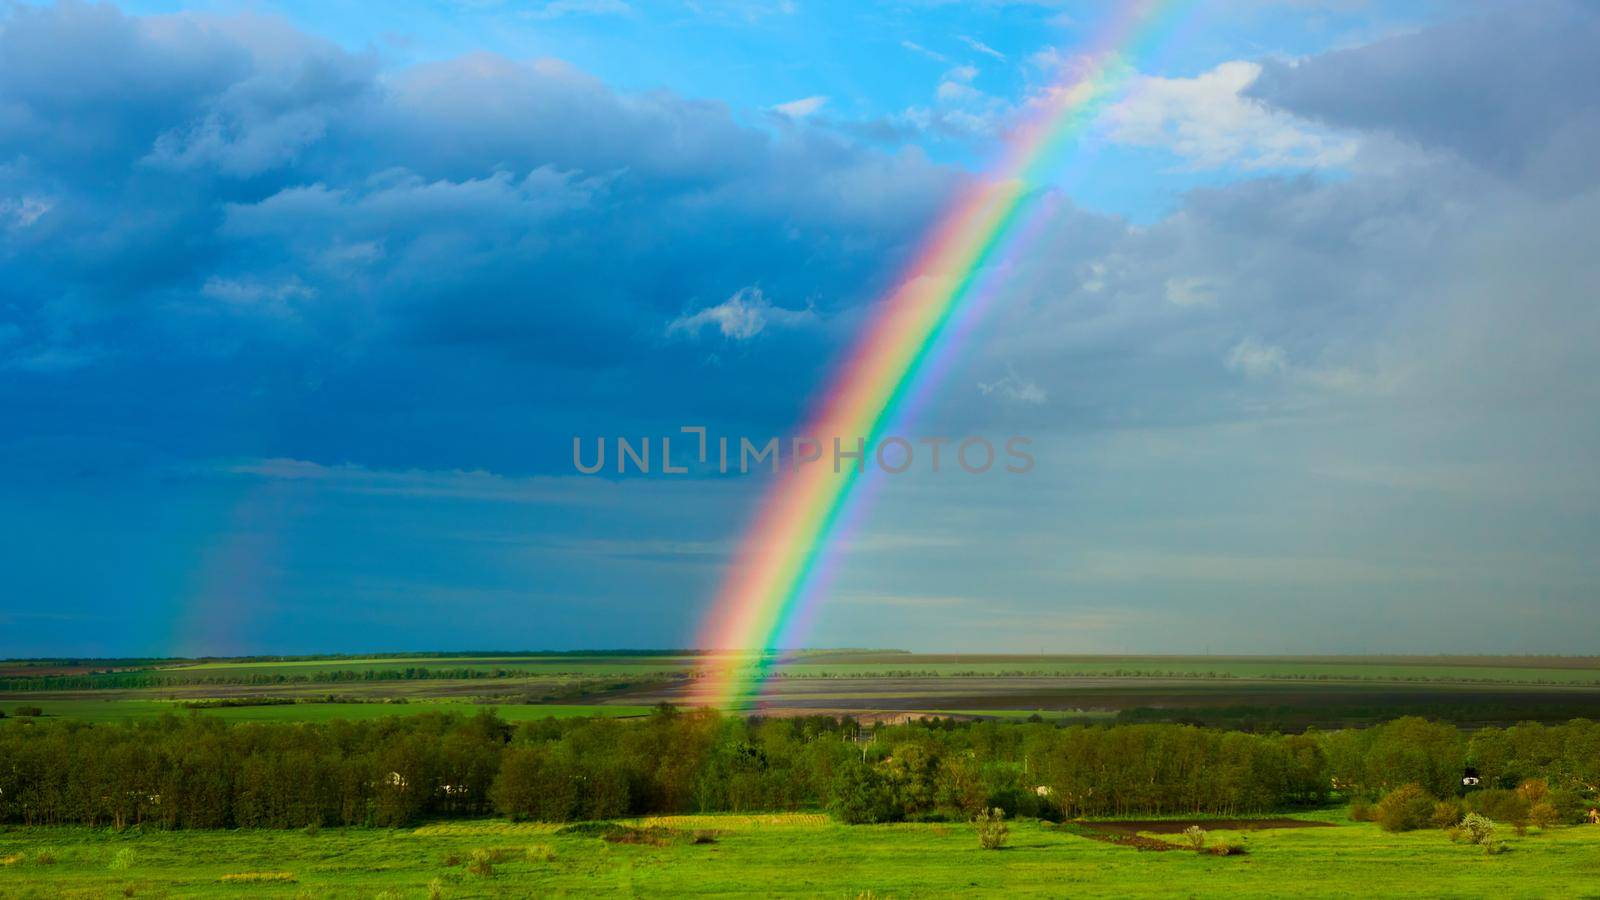 The Rainbow over a field after thunderstorm by sarymsakov